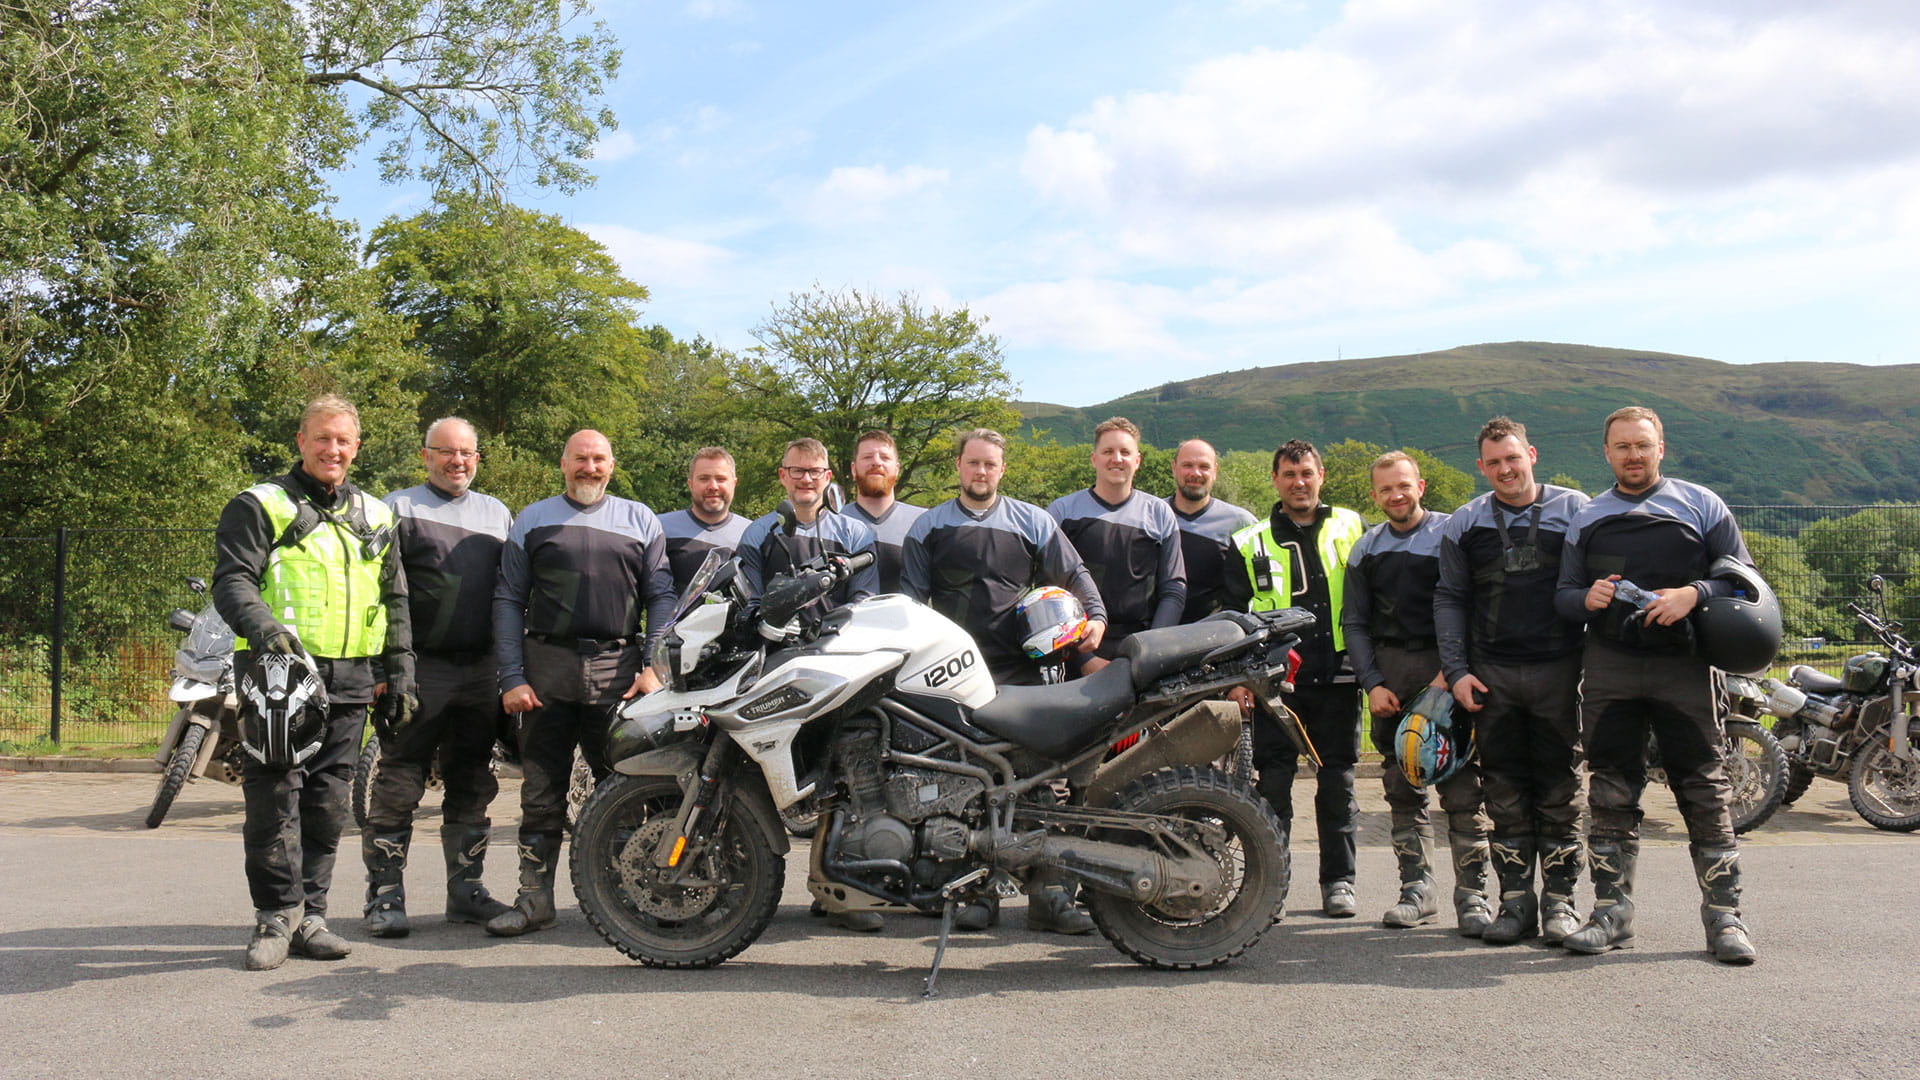 Group shot of the Triumph Tiger riders  on the experience day 